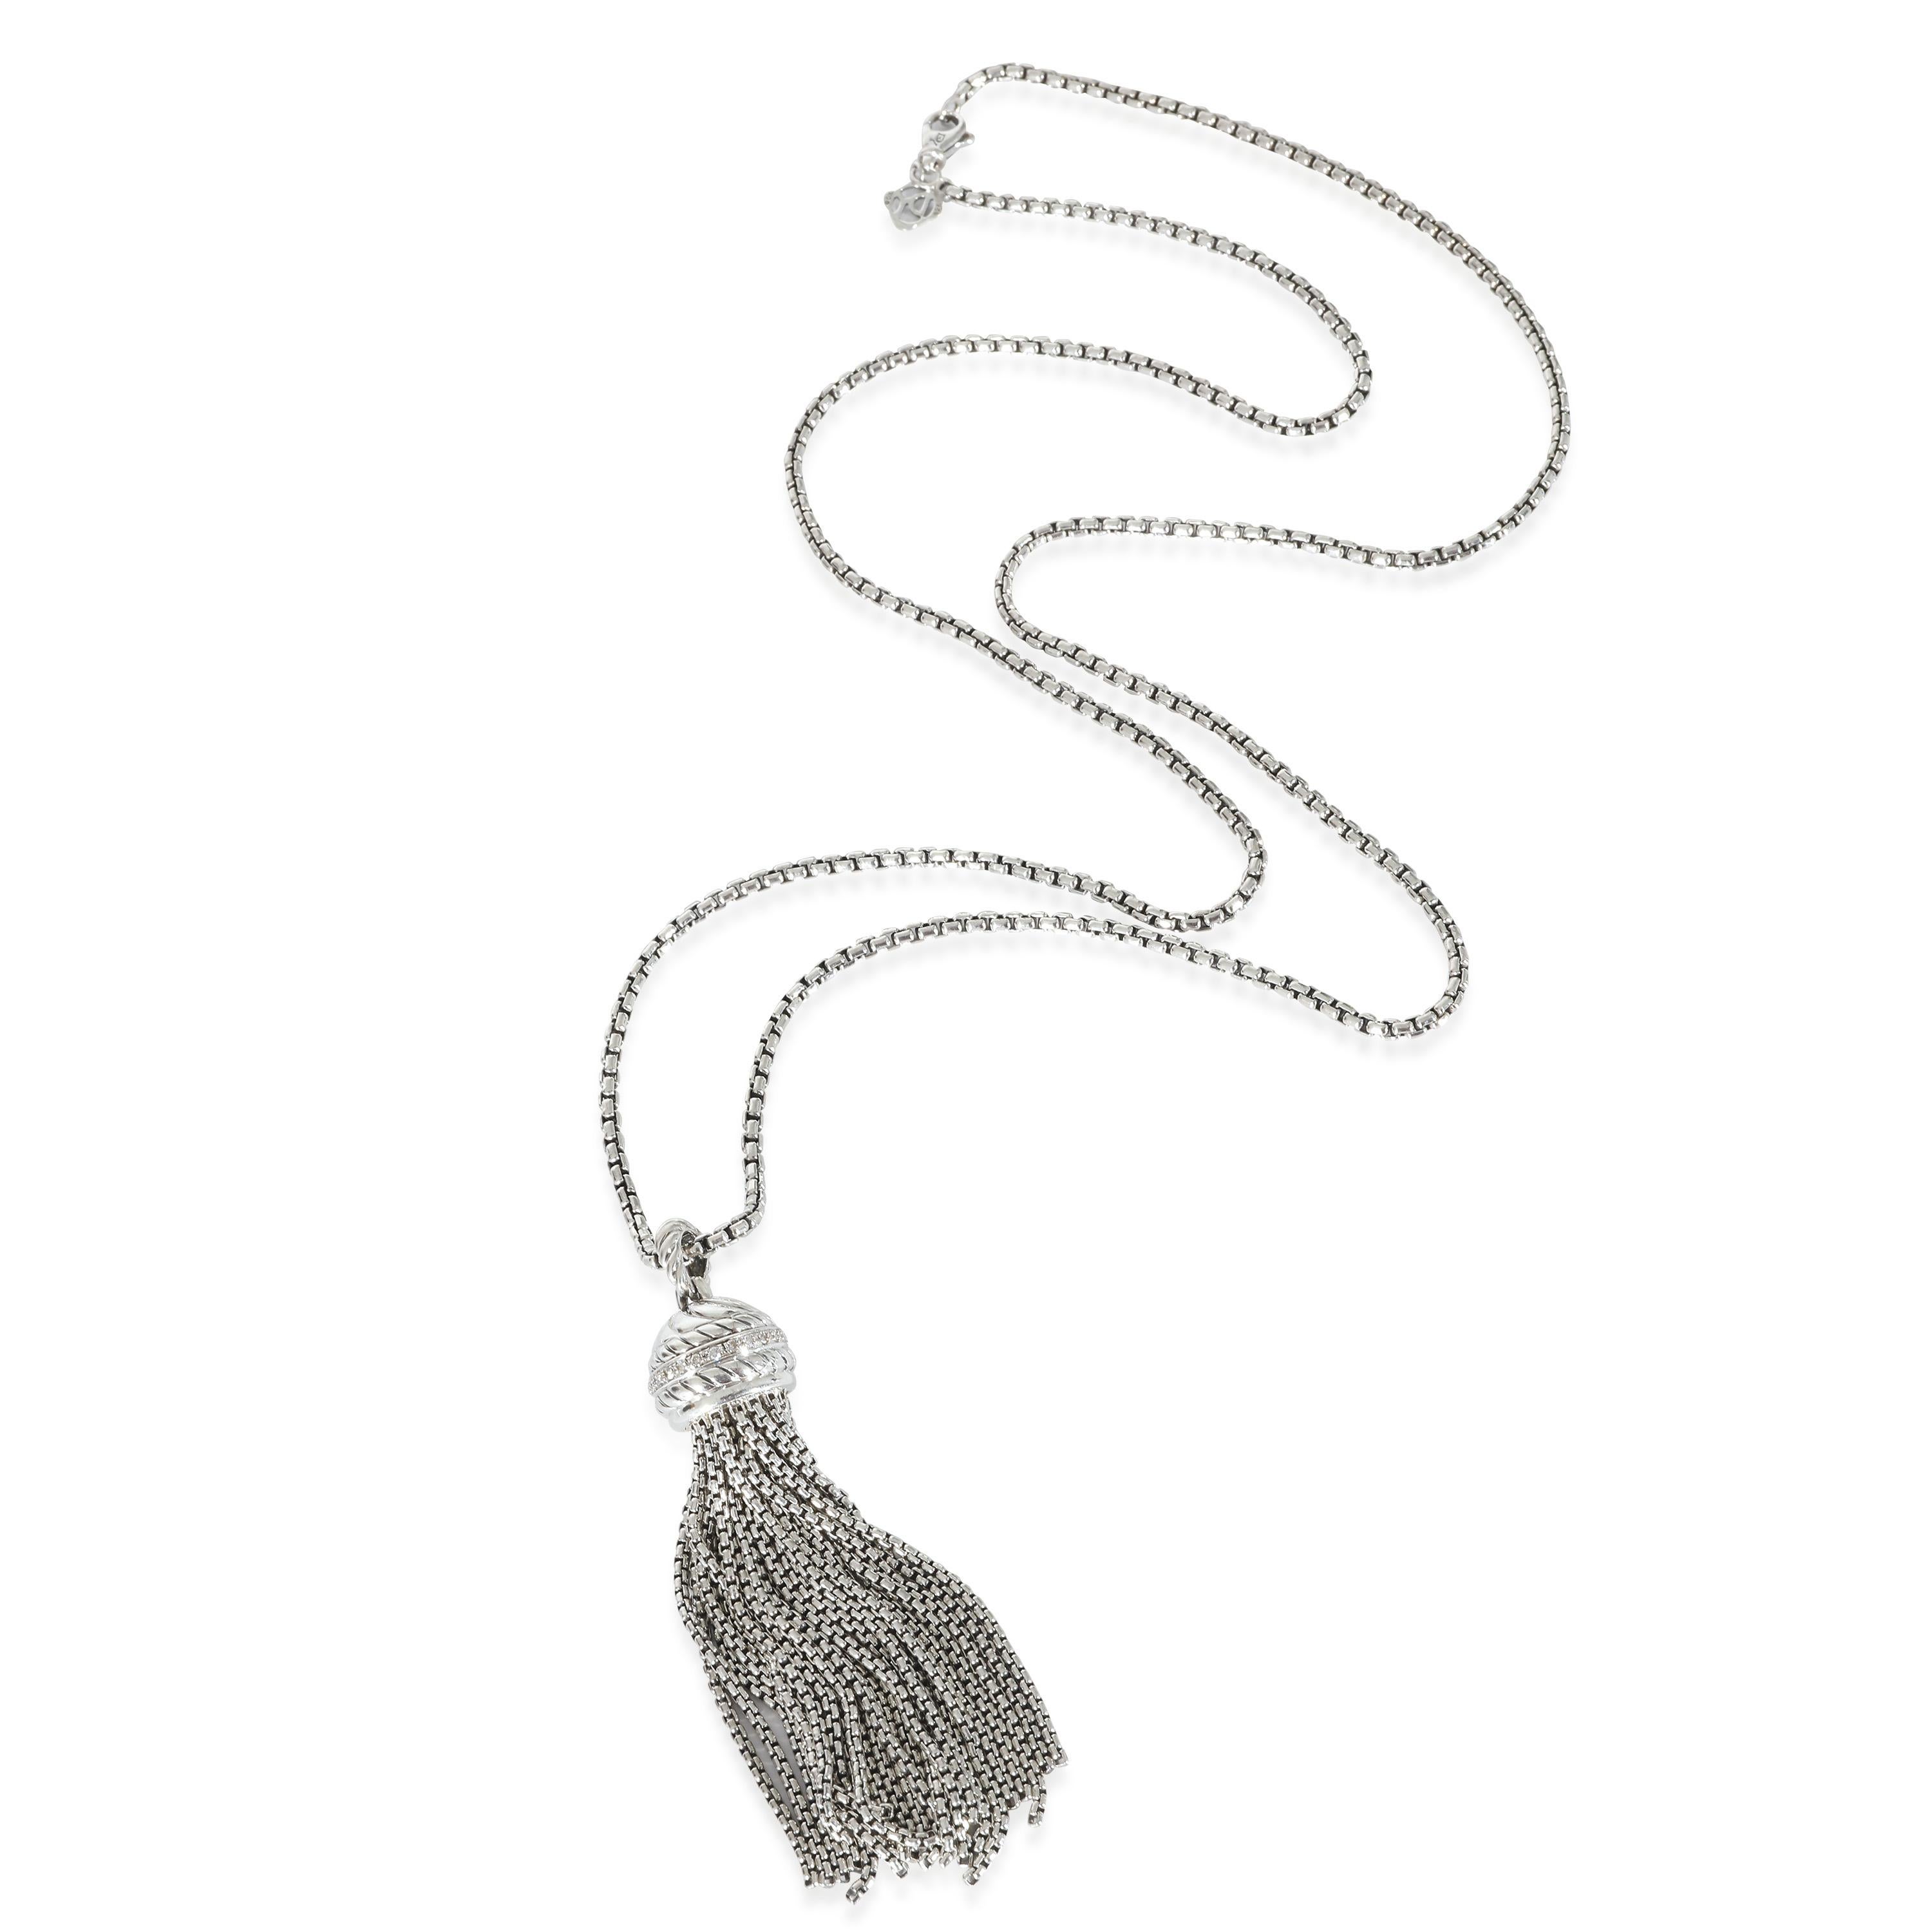 David Yurman Cable Diamond Tassel Pendant in Sterling Silver

PRIMARY DETAILS
SKU: 135783
Listing Title: David Yurman Cable Diamond Tassel Pendant in Sterling Silver
Condition Description: The Cable bracelet was designed in 1984 and is one of David